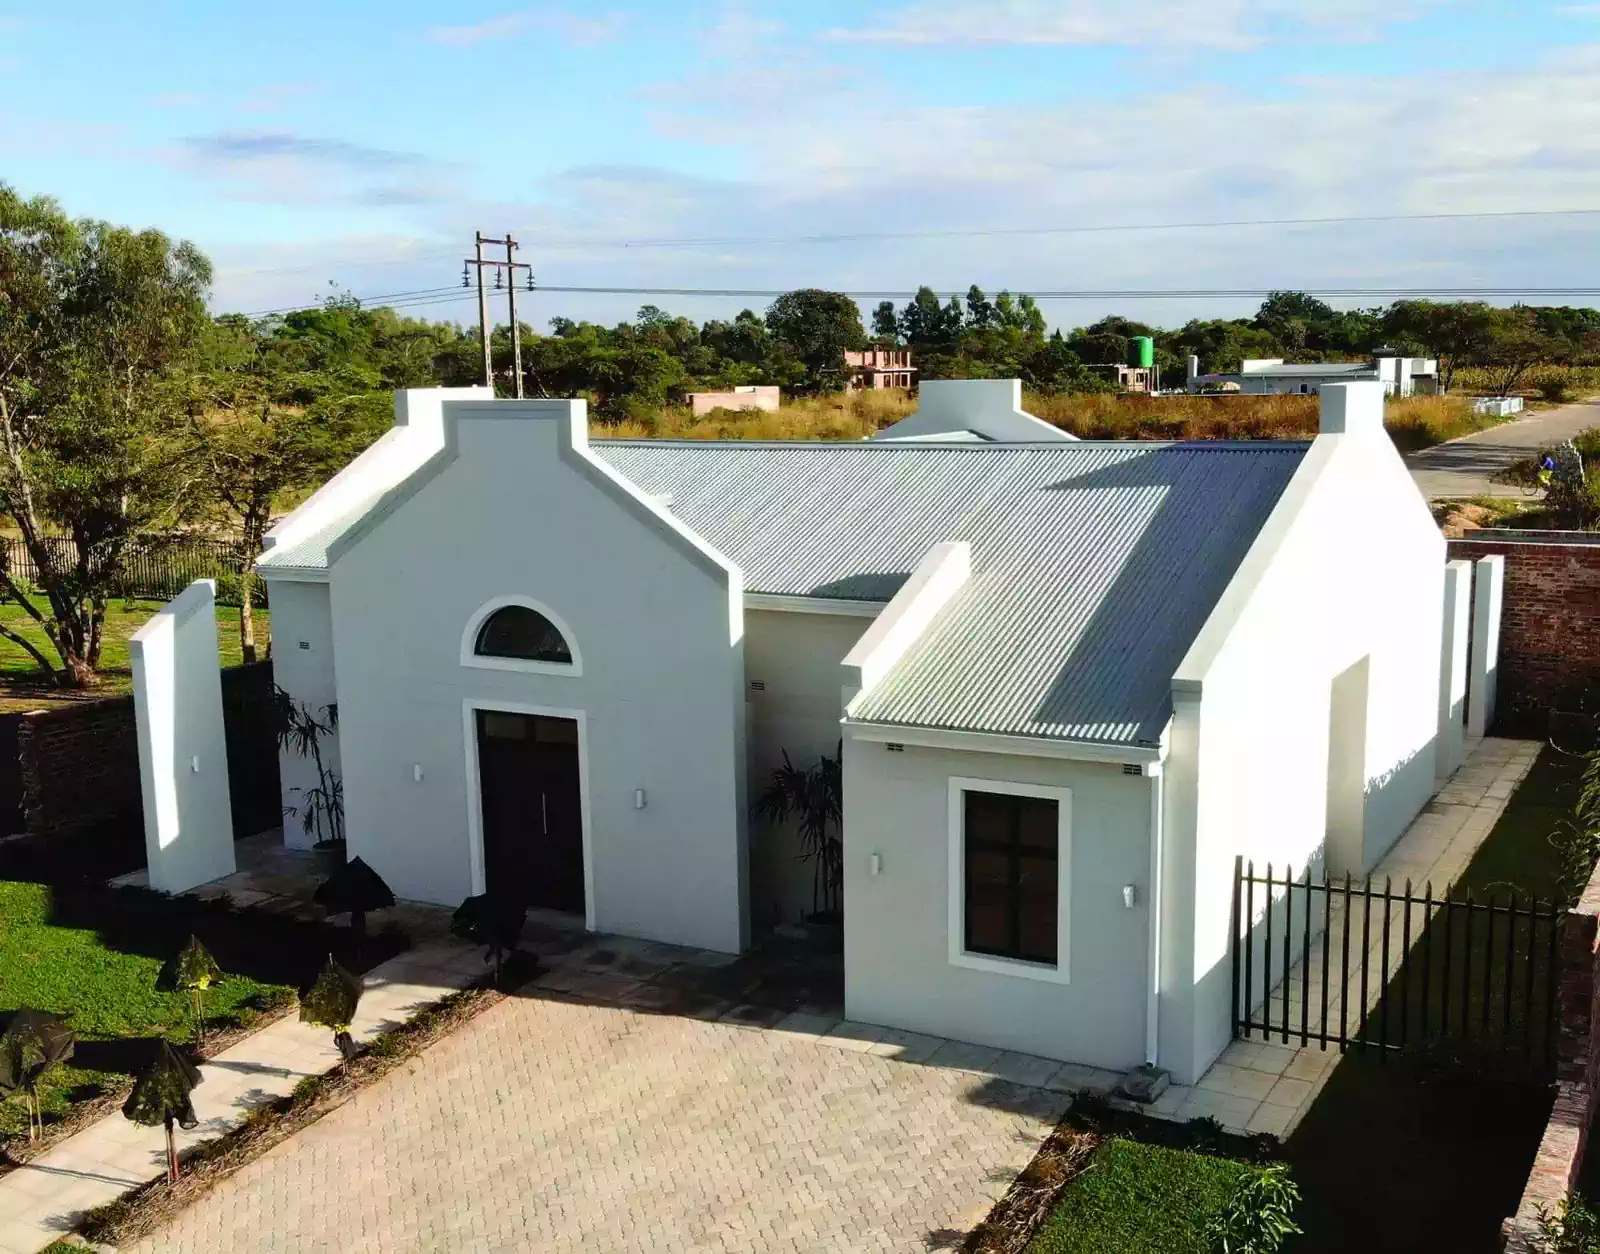 Cape dutch styled house including window surrounds and gables on all four sides. White and grey walls